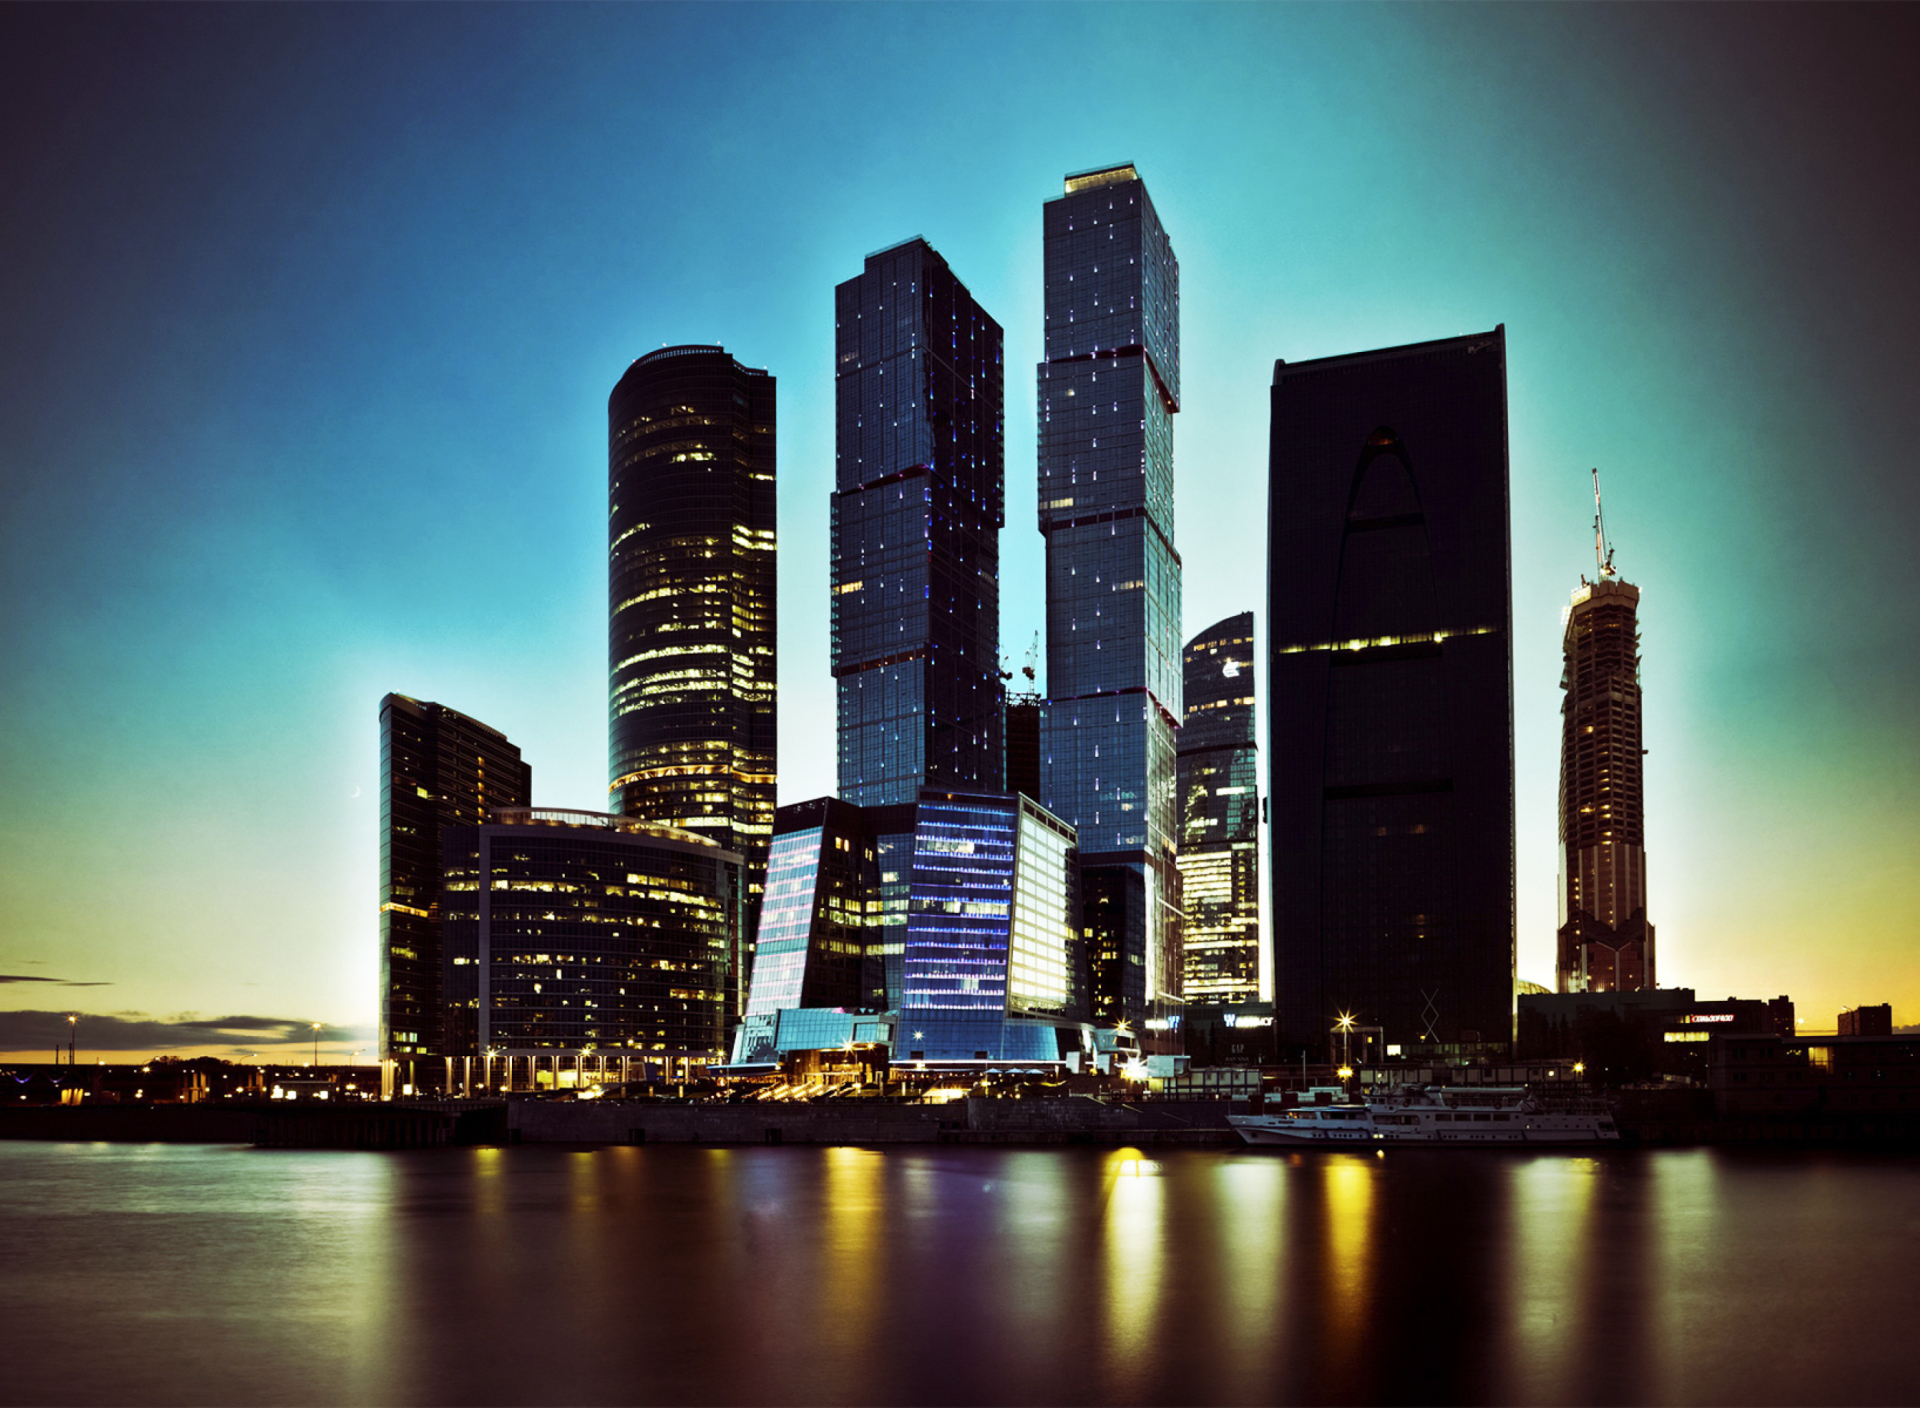 Moscow City Skyscrapers wallpaper 1920x1408